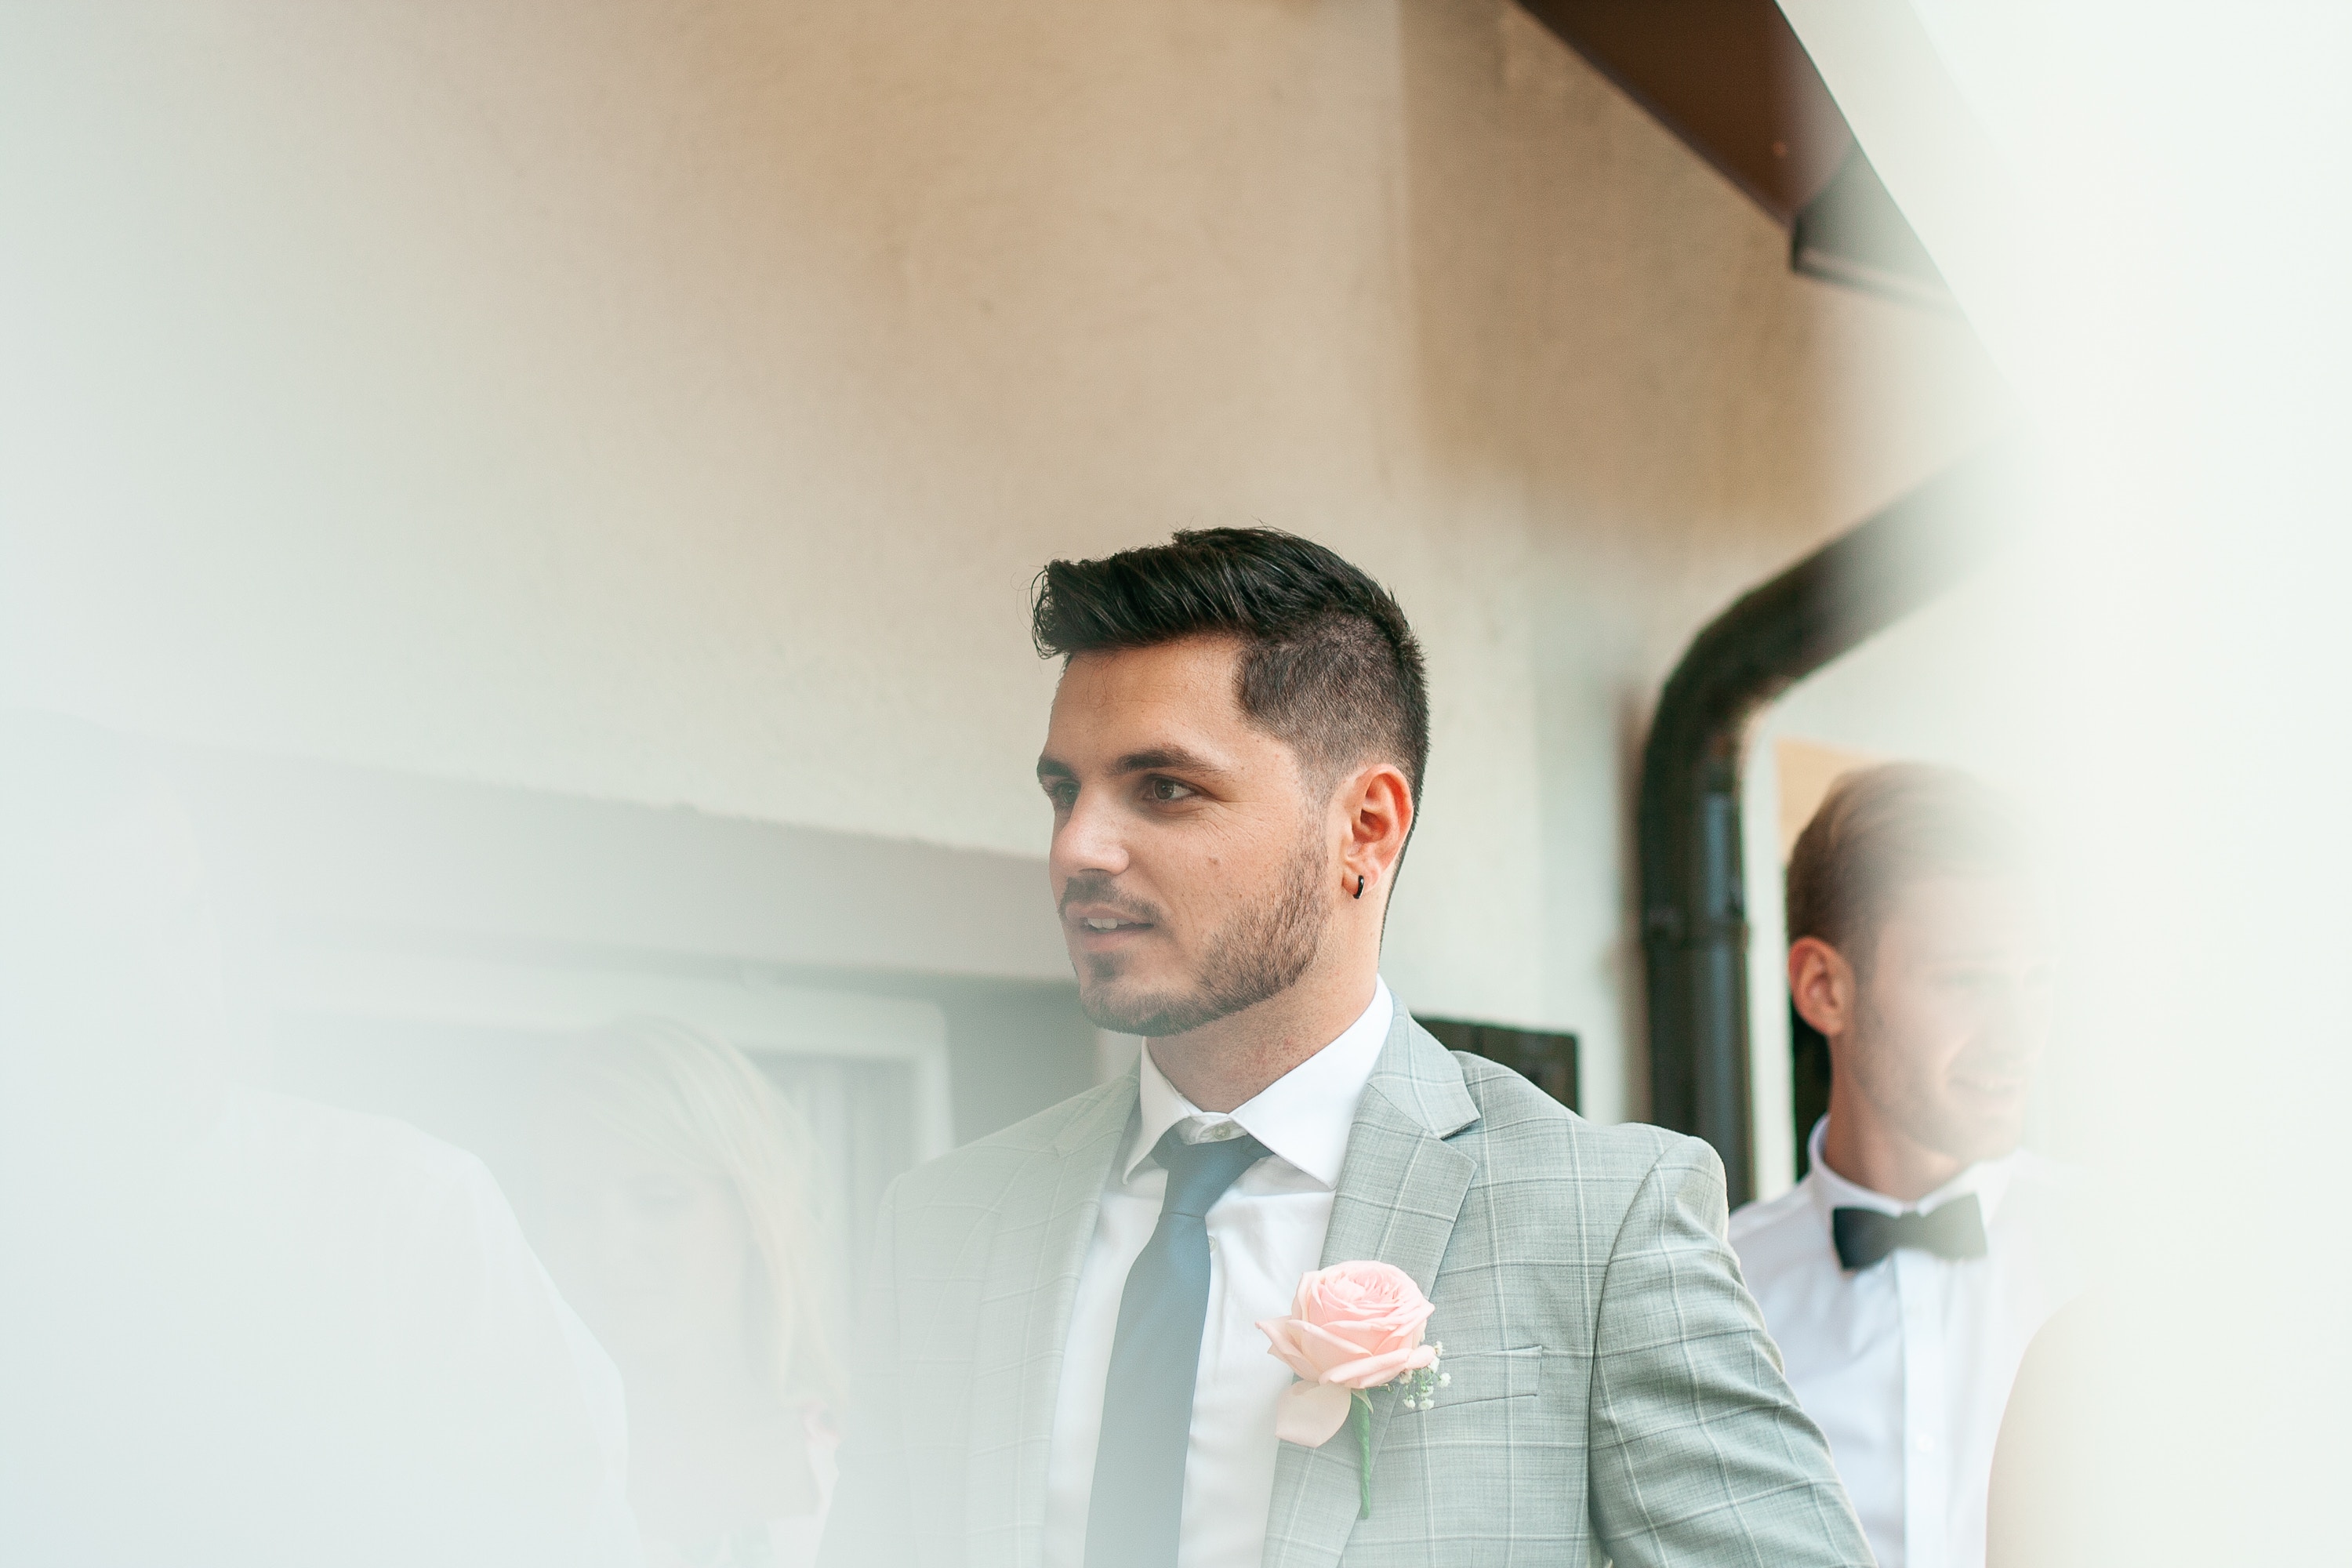 AskMen; Do Men Fantasize About Their Weddings? Here's What Some Guys Had to Say...